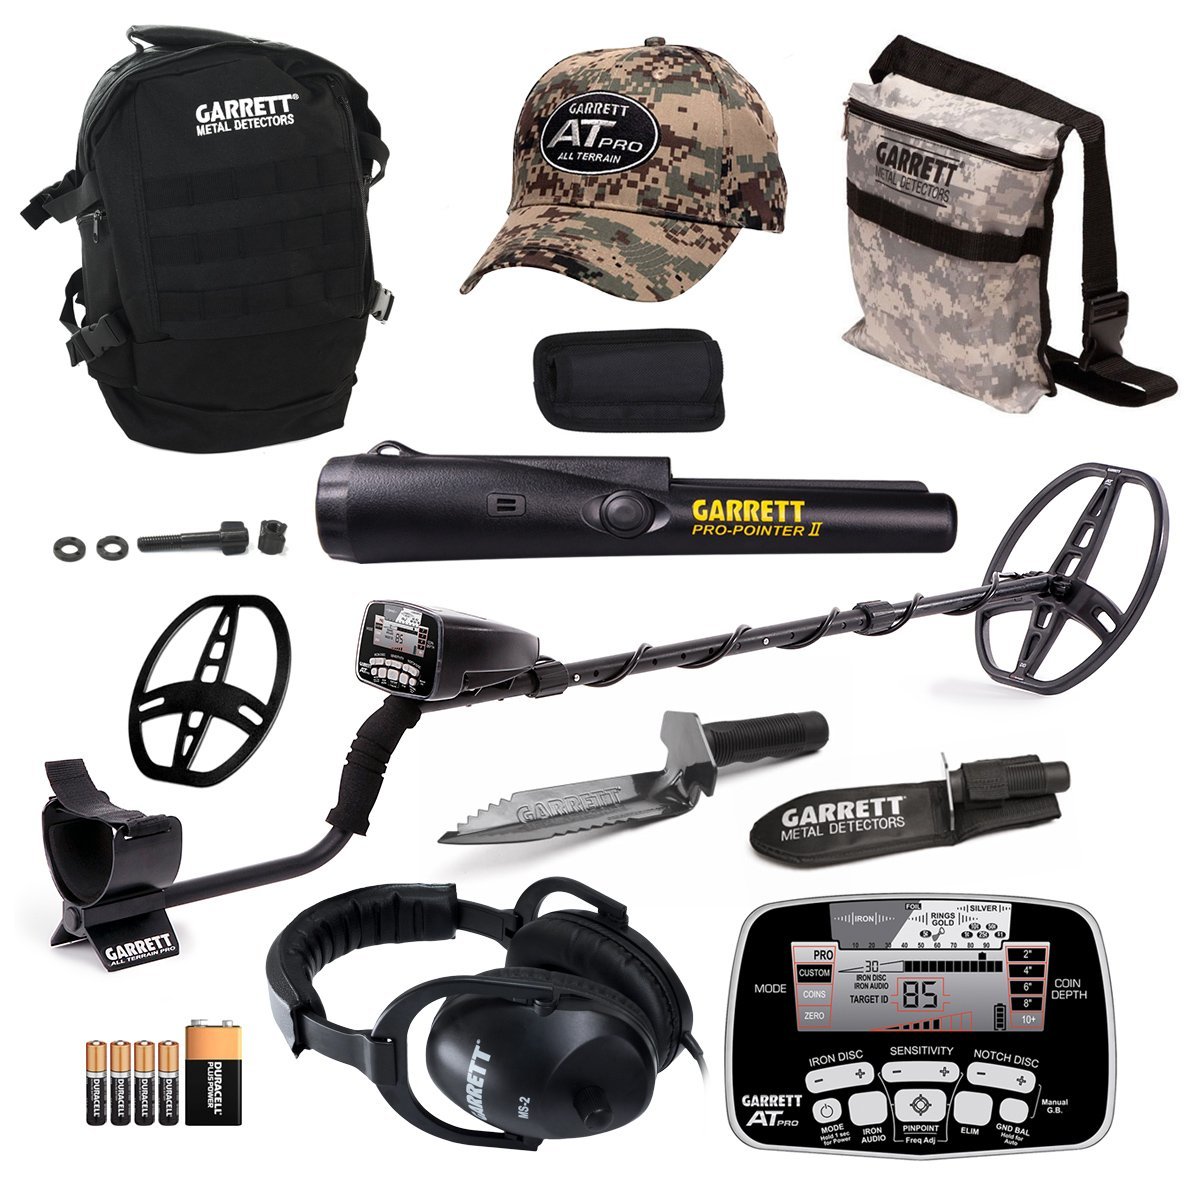 Primary image for Garrett at Pro Metal Detector Bonus Pack with ProPointer II and Edge Digger